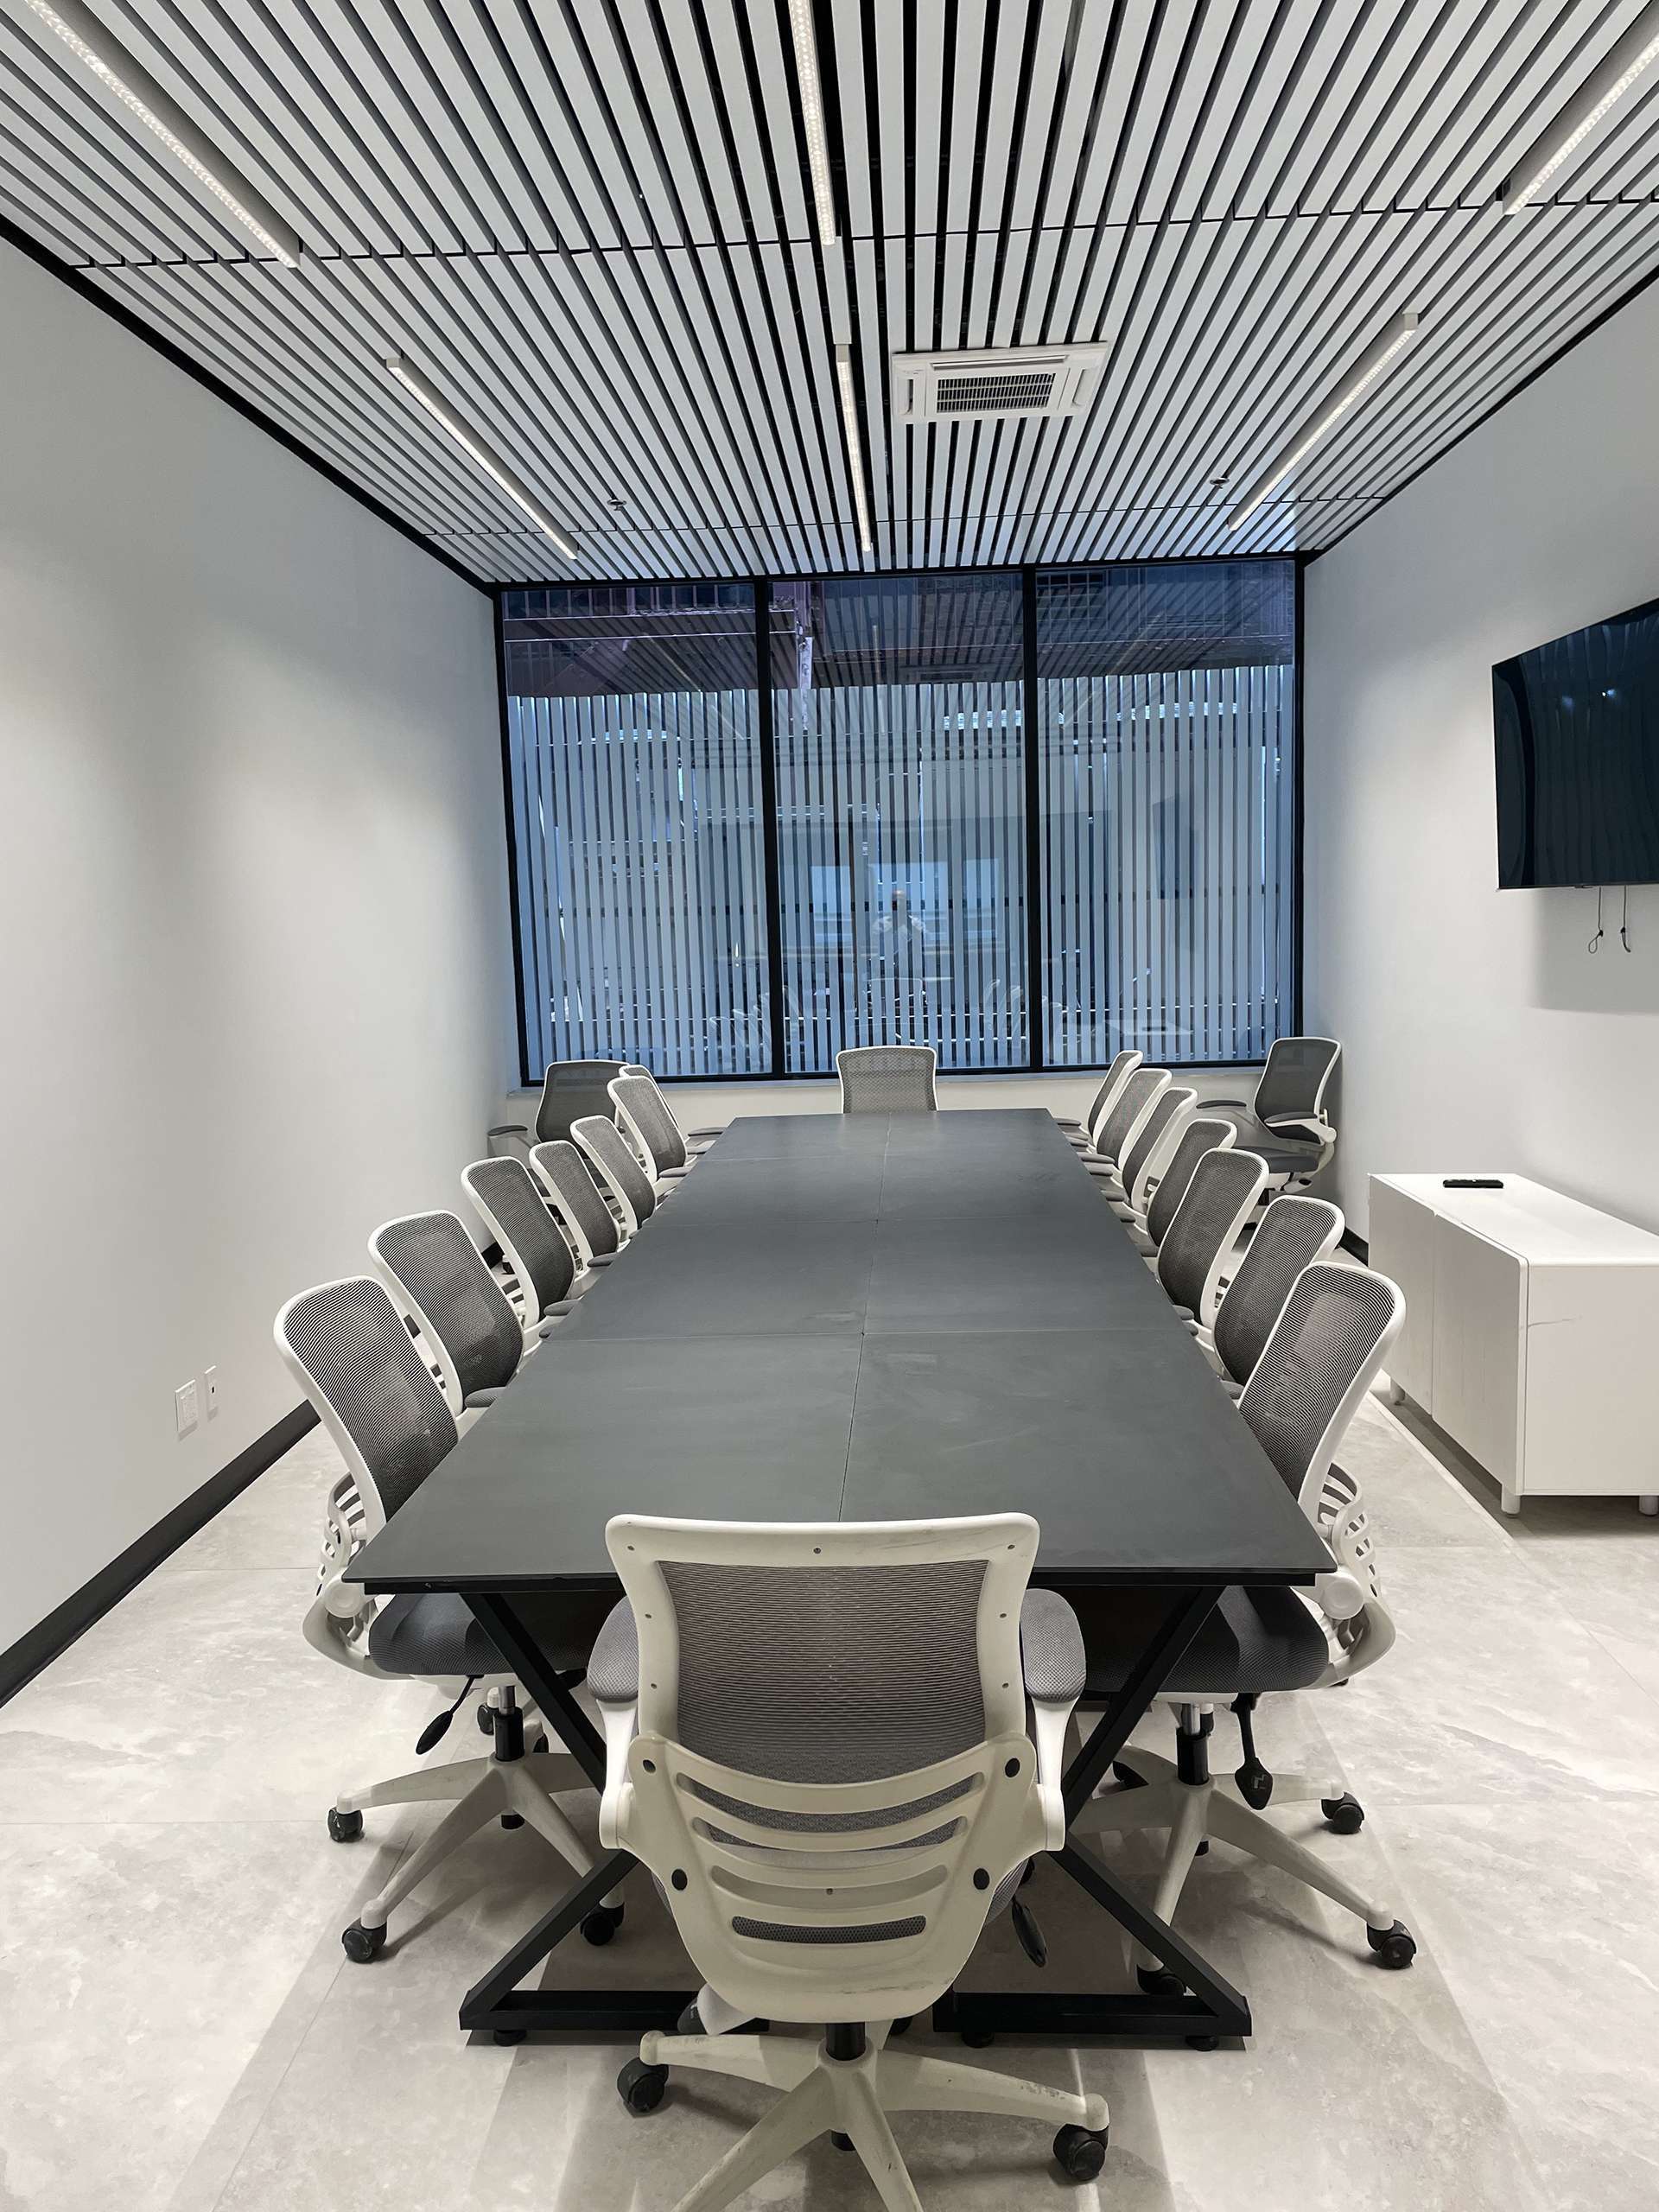 Adaptable boardroom inspiring creativity and collaboration for various purposes.